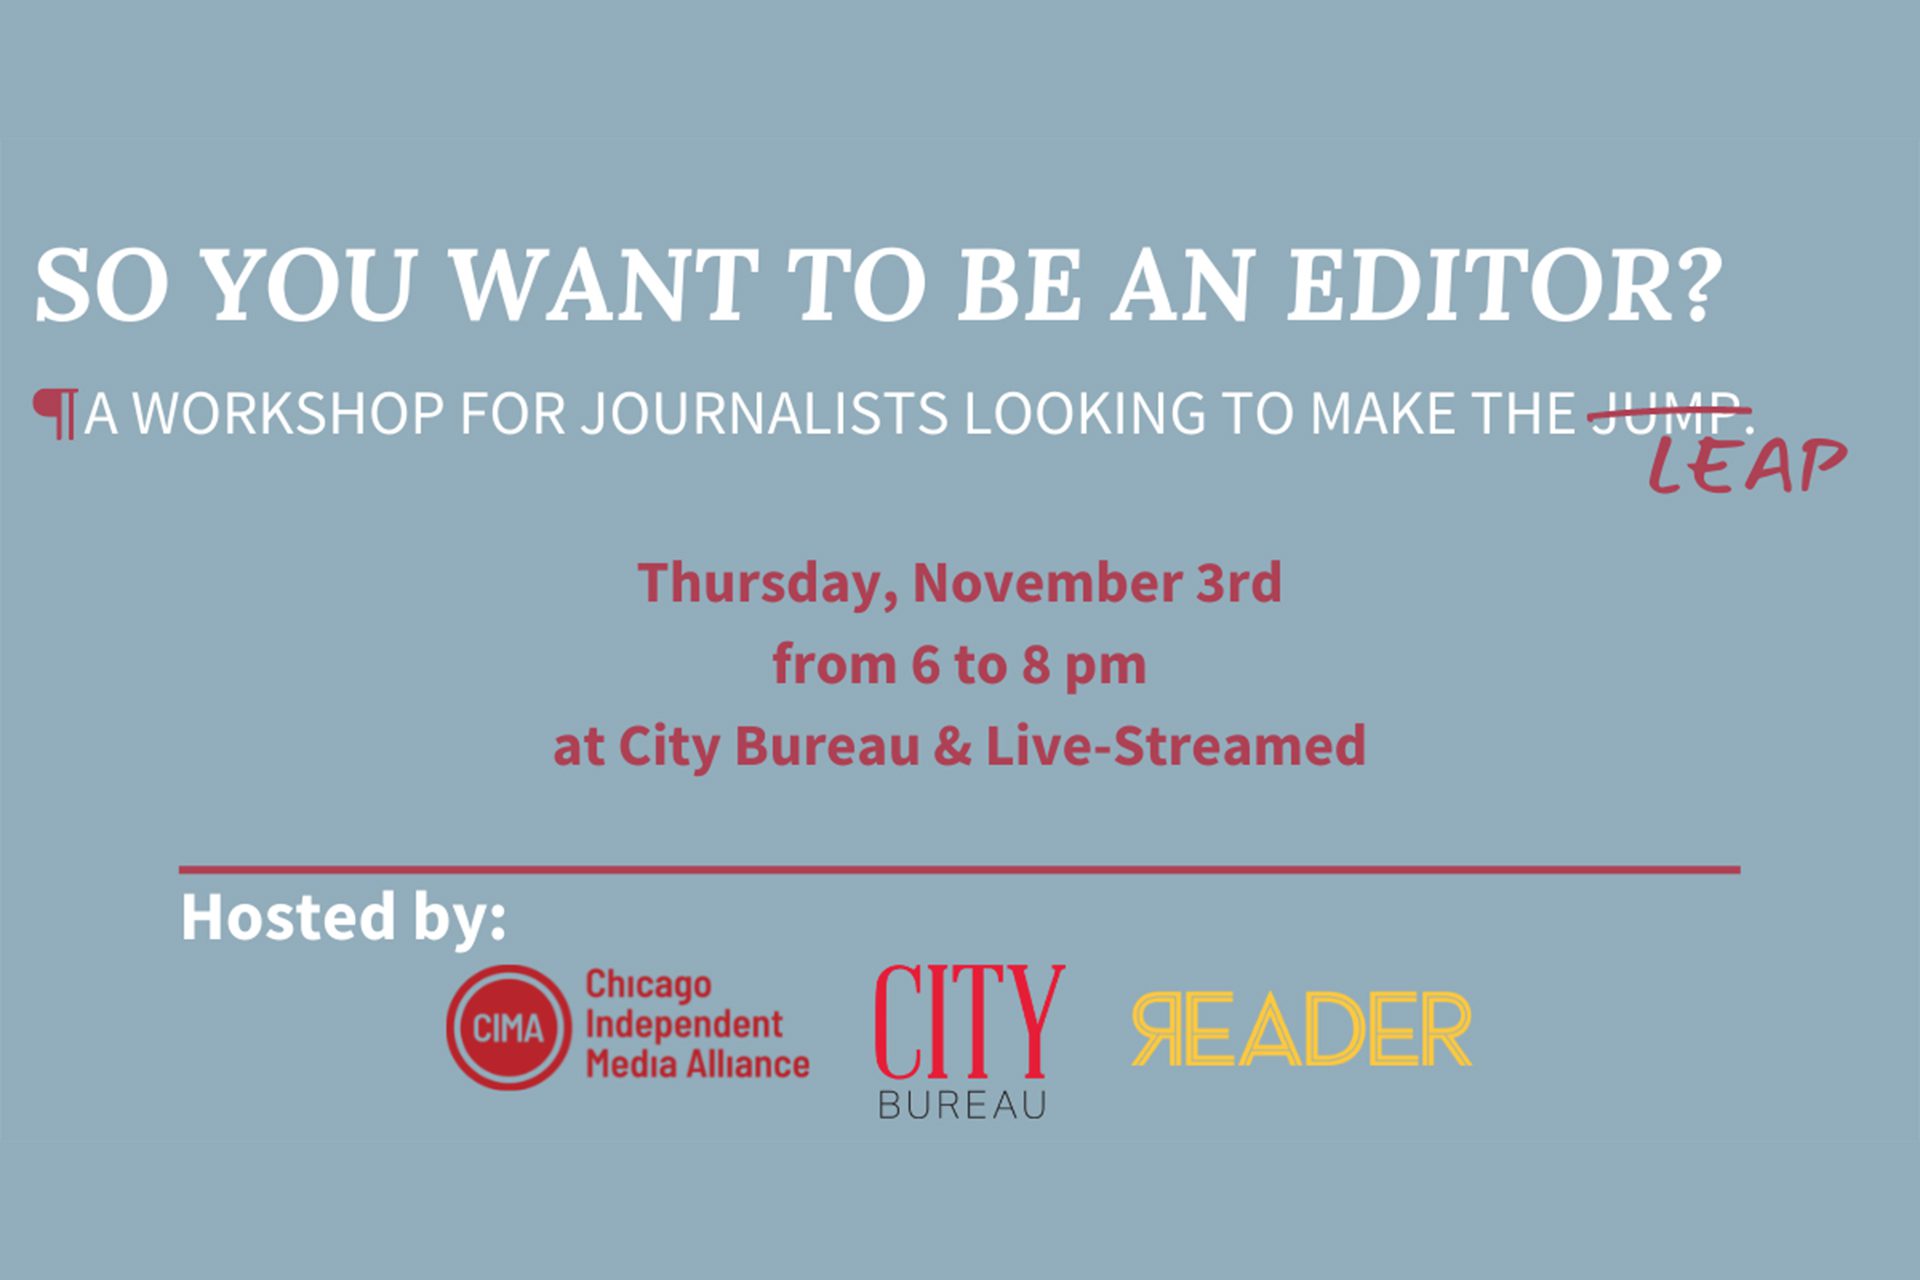 "so you want to be an editor: a workshop for journalists looking to make the leap. Thursday November 3rd from 6 to 8 pm at City Bureau"